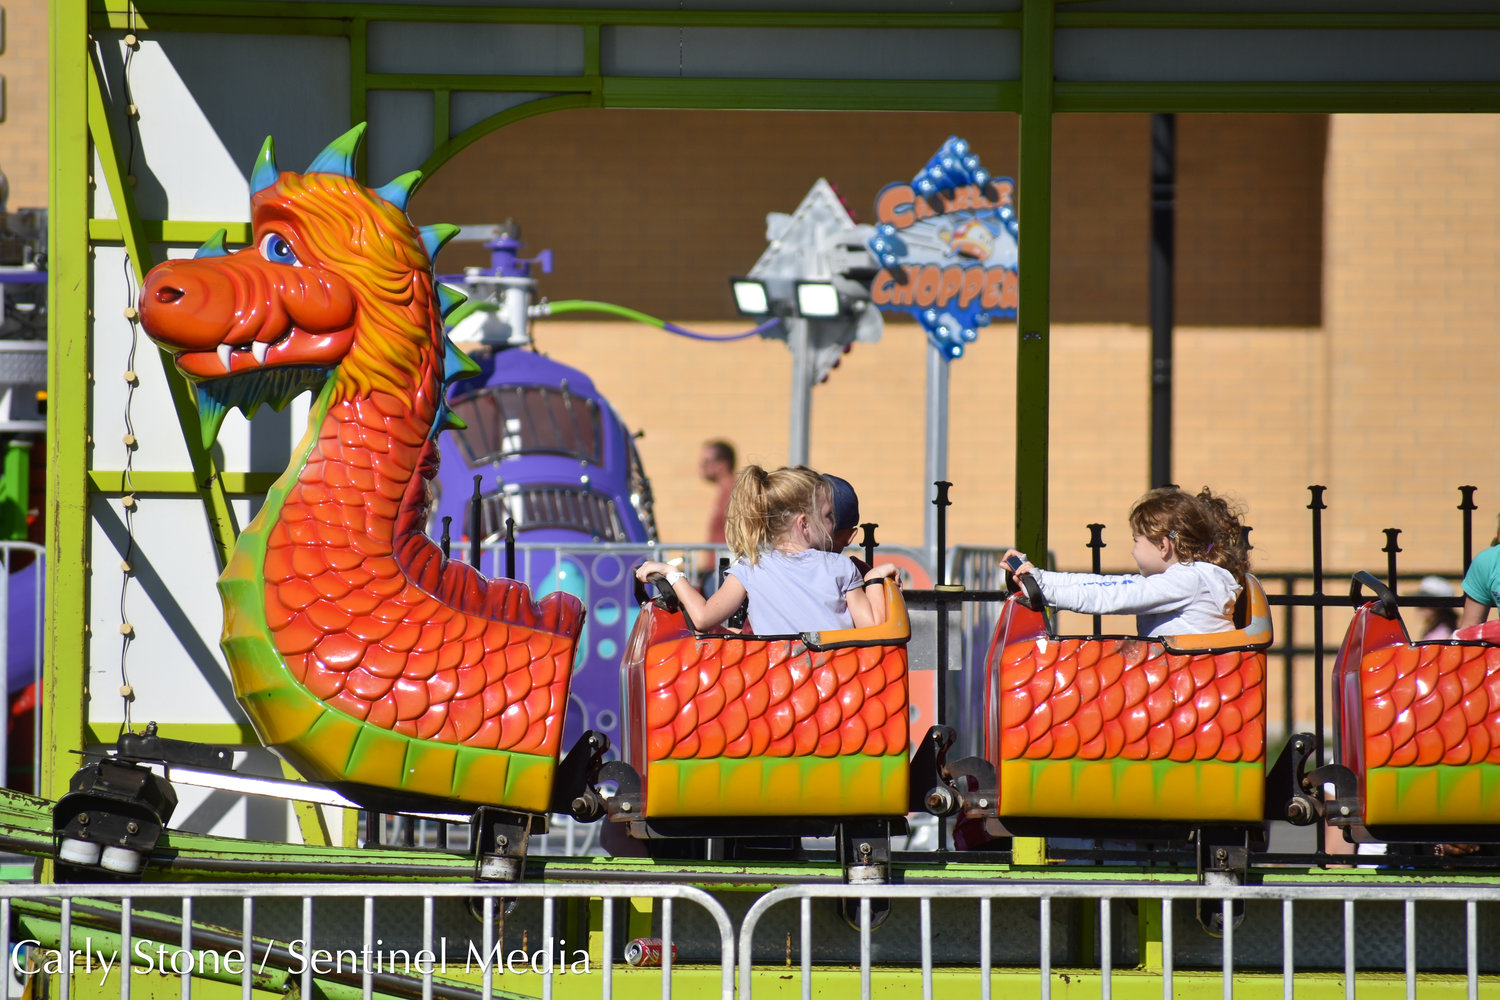 A section of rides fit just for kids is available on the state fair midway.